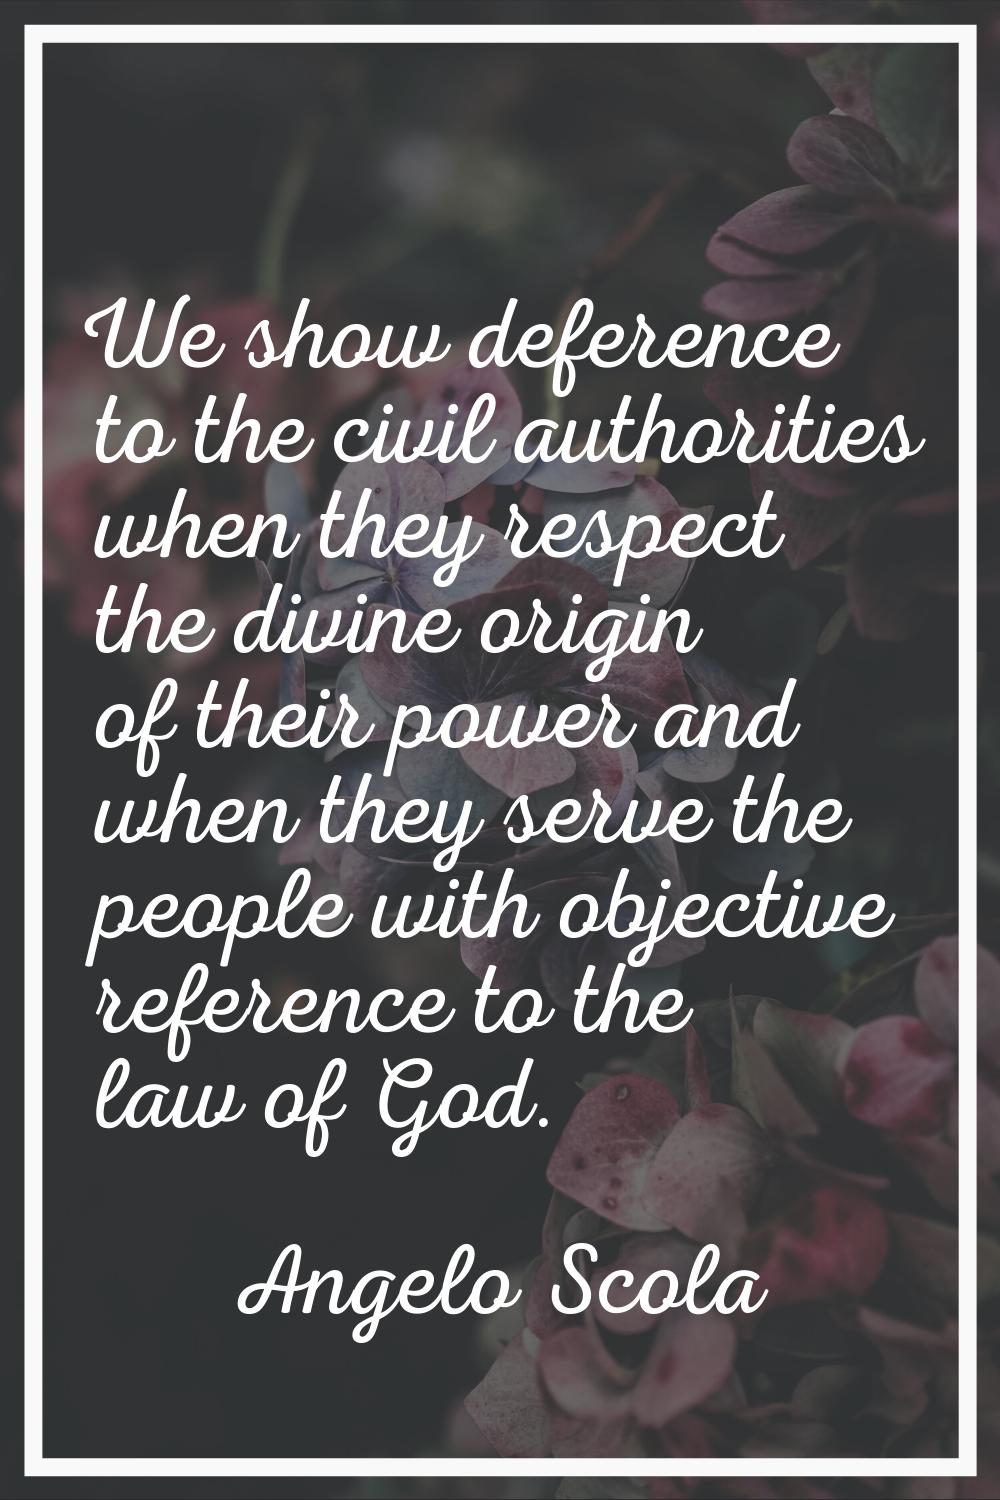 We show deference to the civil authorities when they respect the divine origin of their power and w